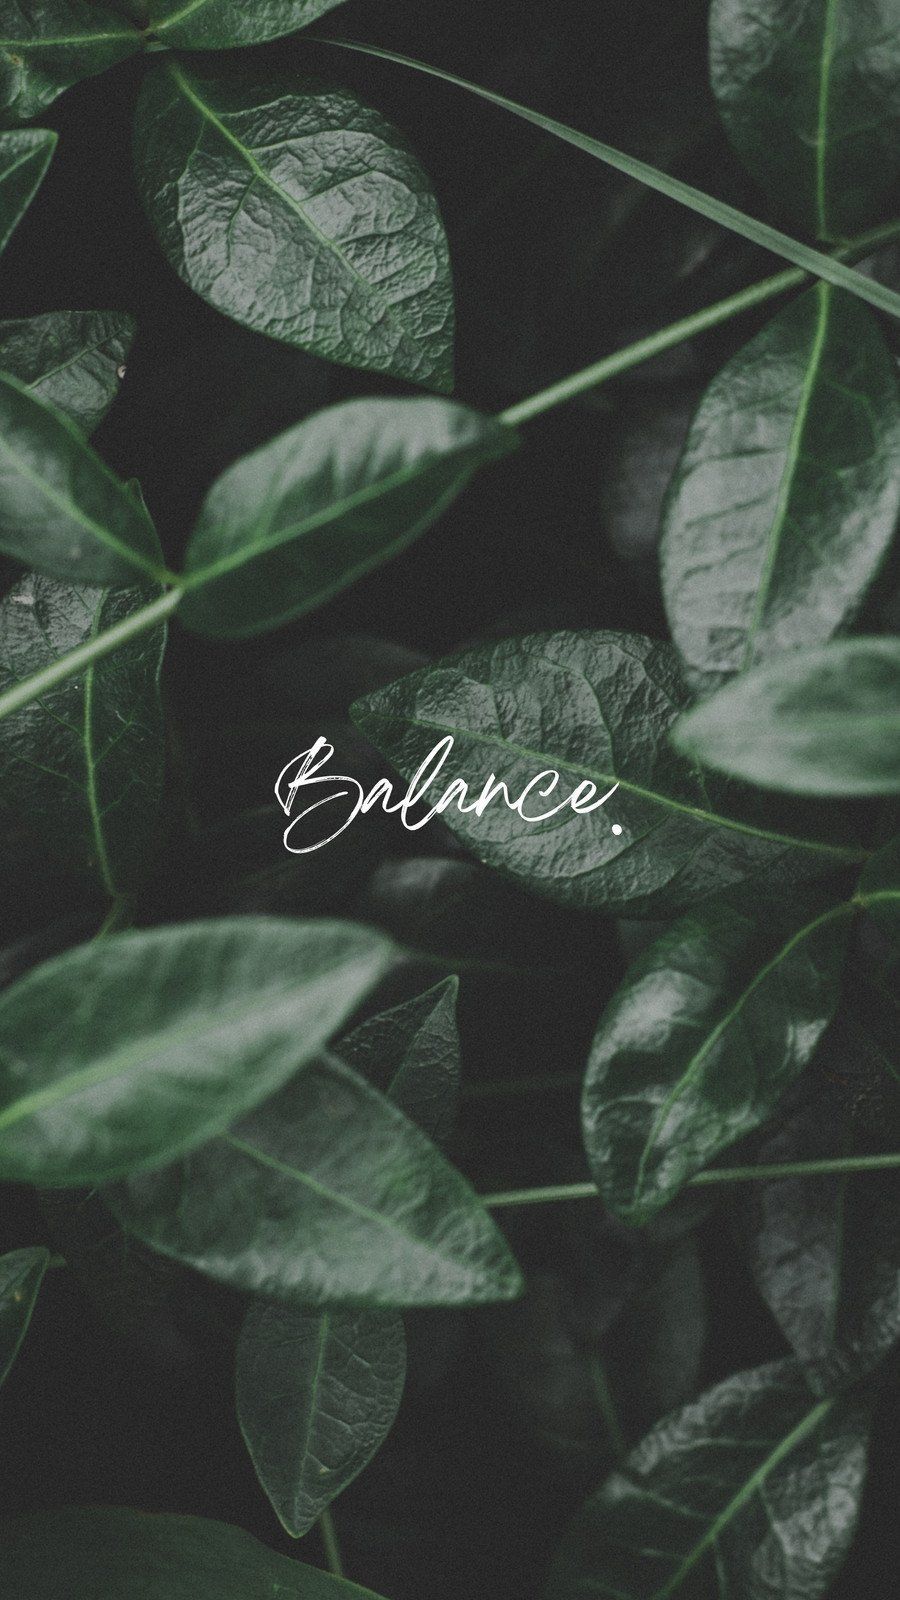 IPhone wallpaper with the word balance on a background of green leaves - Balance, leaves